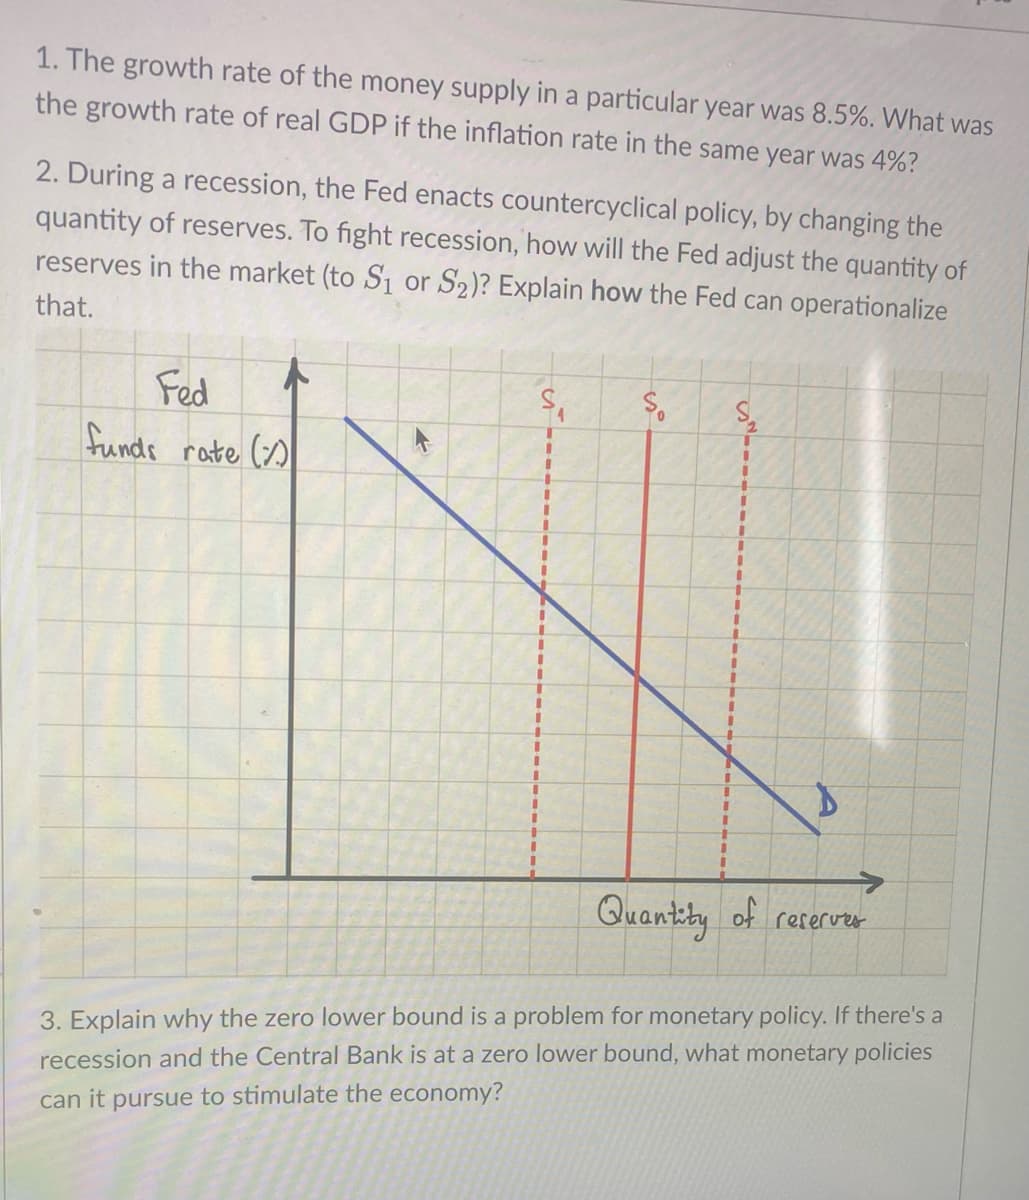 1. The growth rate of the money supply in a particular year was 8.5%. What was
the growth rate of real GDP if the inflation rate in the same year was 4%?
2. During a recession, the Fed enacts countercyclical policy, by changing the
quantity of reserves. To fight recession, how will the Fed adjust the quantity of
reserves in the market (to S₁ or S₂)? Explain how the Fed can operationalize
that.
Fed
funds rate ()
S
I
1
I
I
1
T
I
1
1
1
1
I
||
I
I
1
1
1
1
So
I
I
1
1
I
1
I
I
1
1
I
1
1
J
I
I
1
1
+
I
I
I
I
2
D
Quantity of reserves
3. Explain why the zero lower bound is a problem for monetary policy. If there's a
recession and the Central Bank is at a zero lower bound, what monetary policies
can it pursue to stimulate the economy?